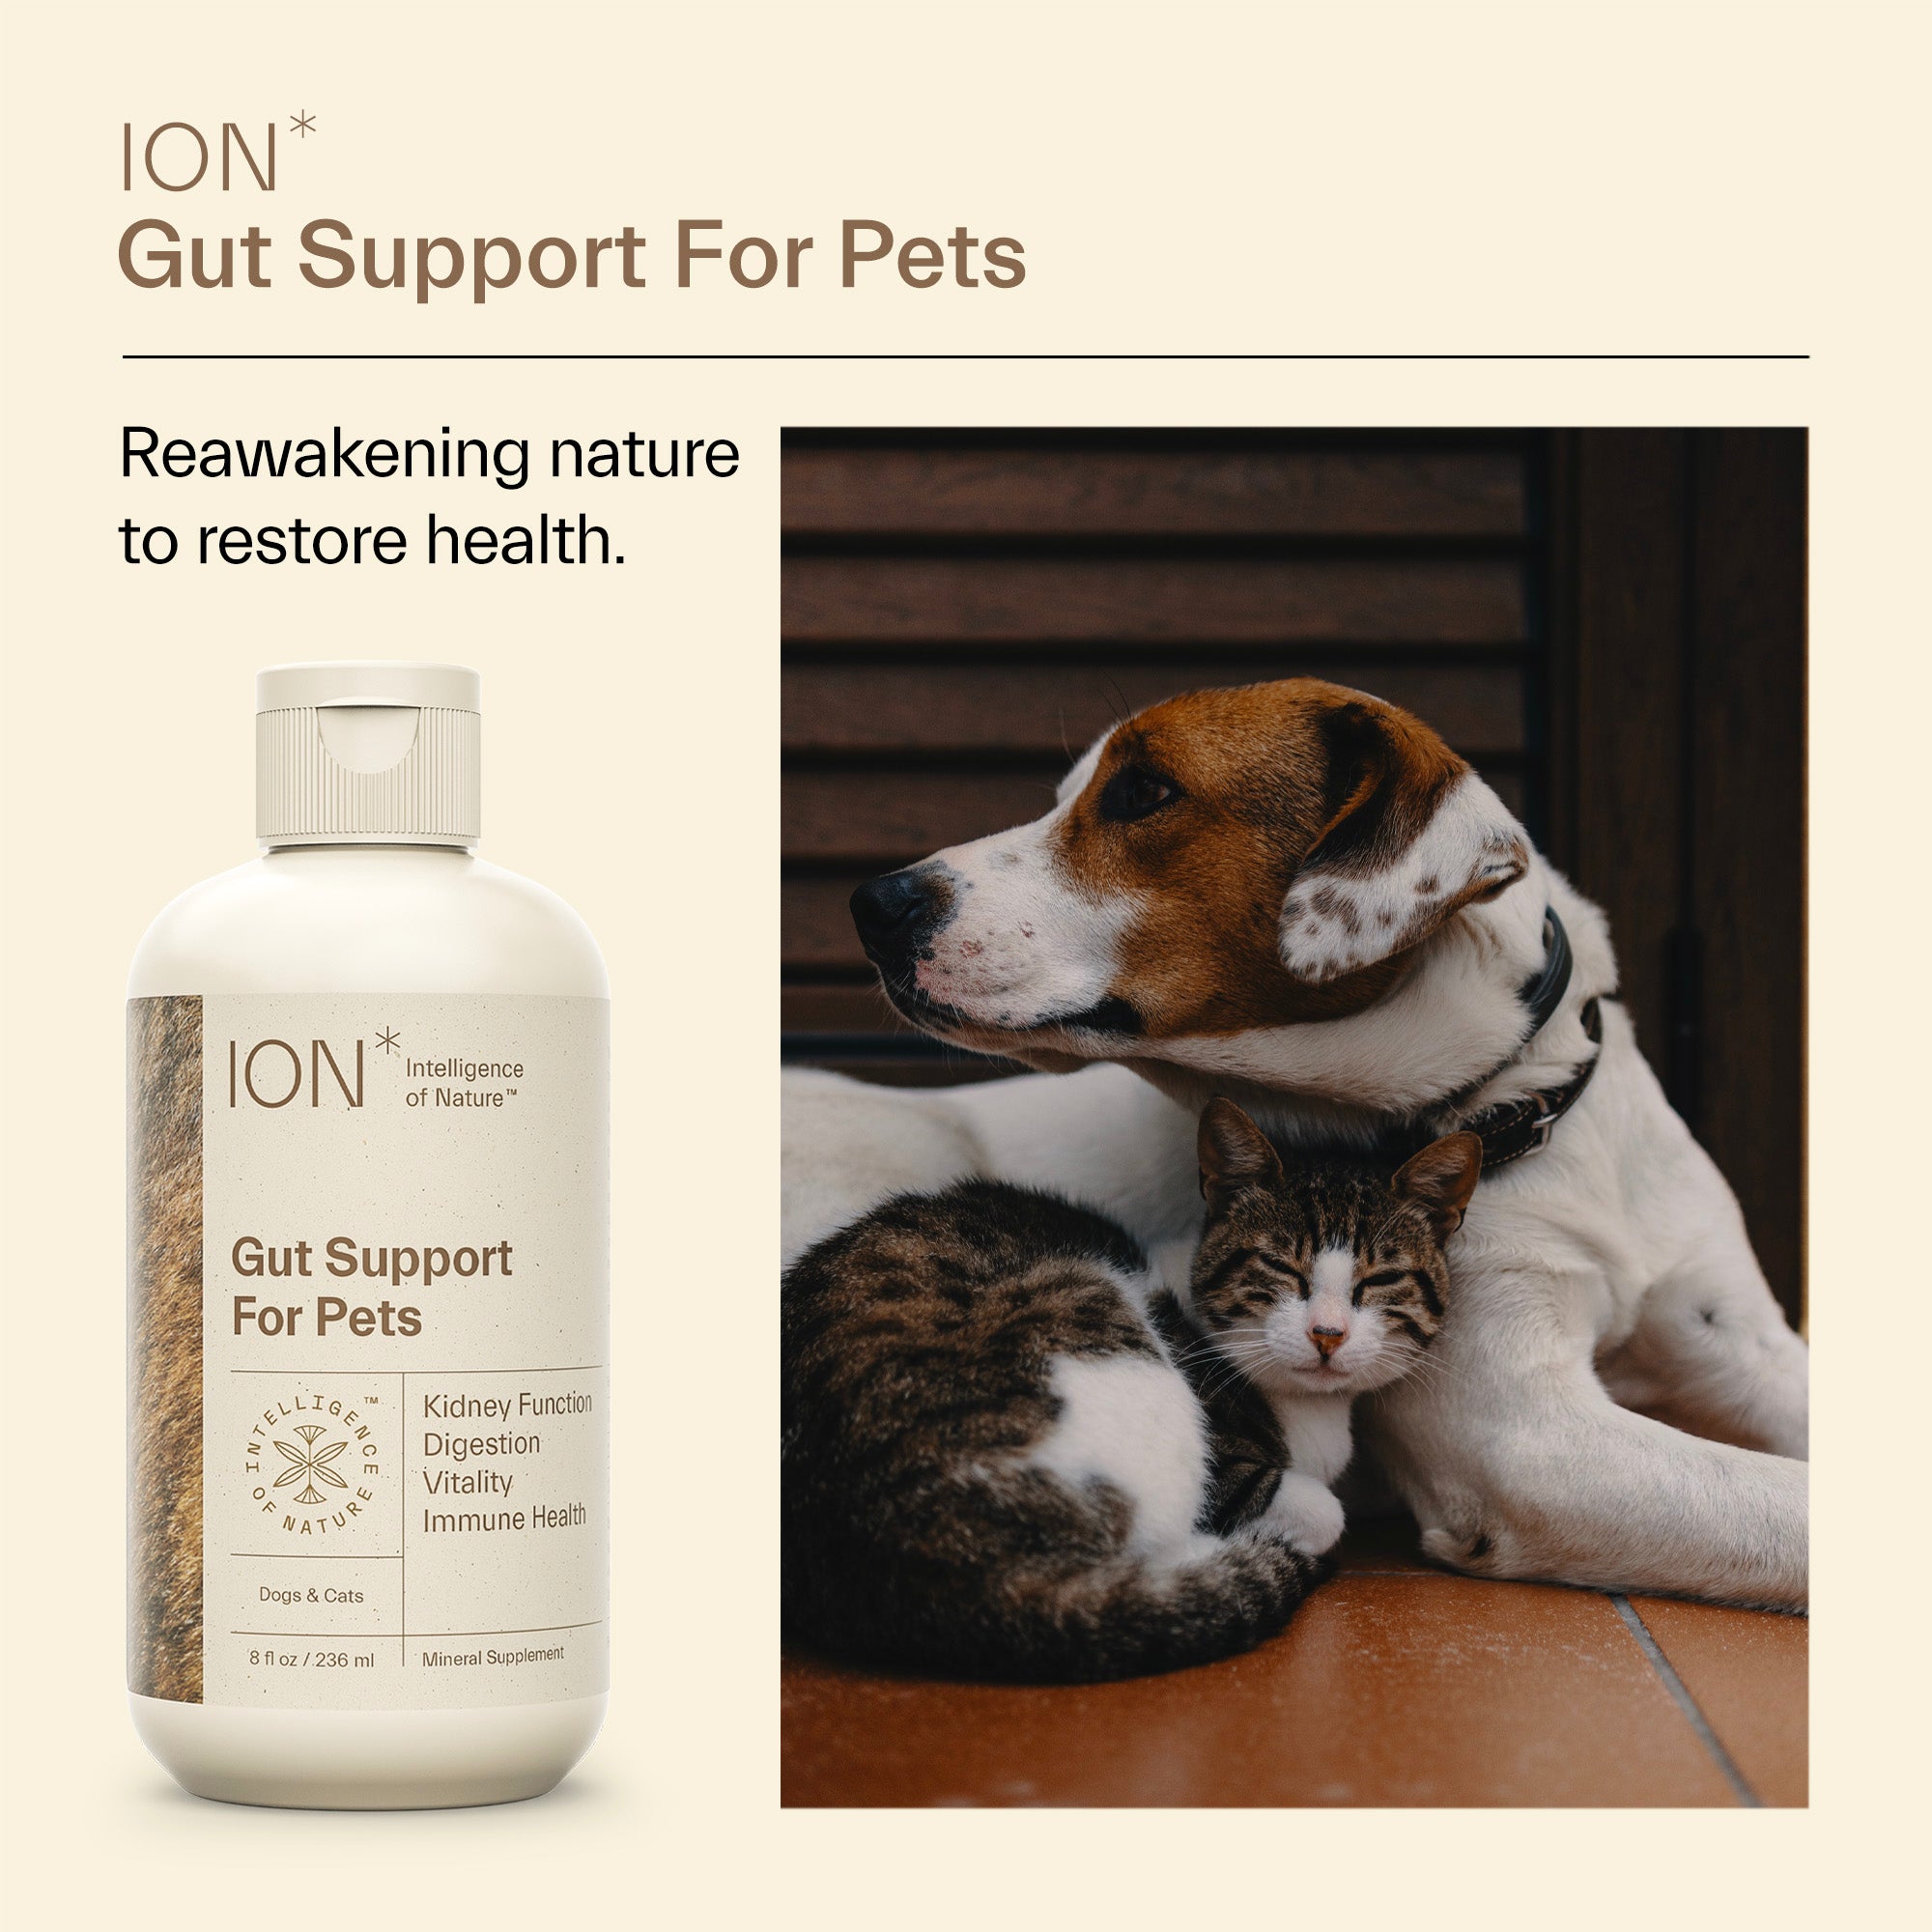 ION* Gut Support for Pets